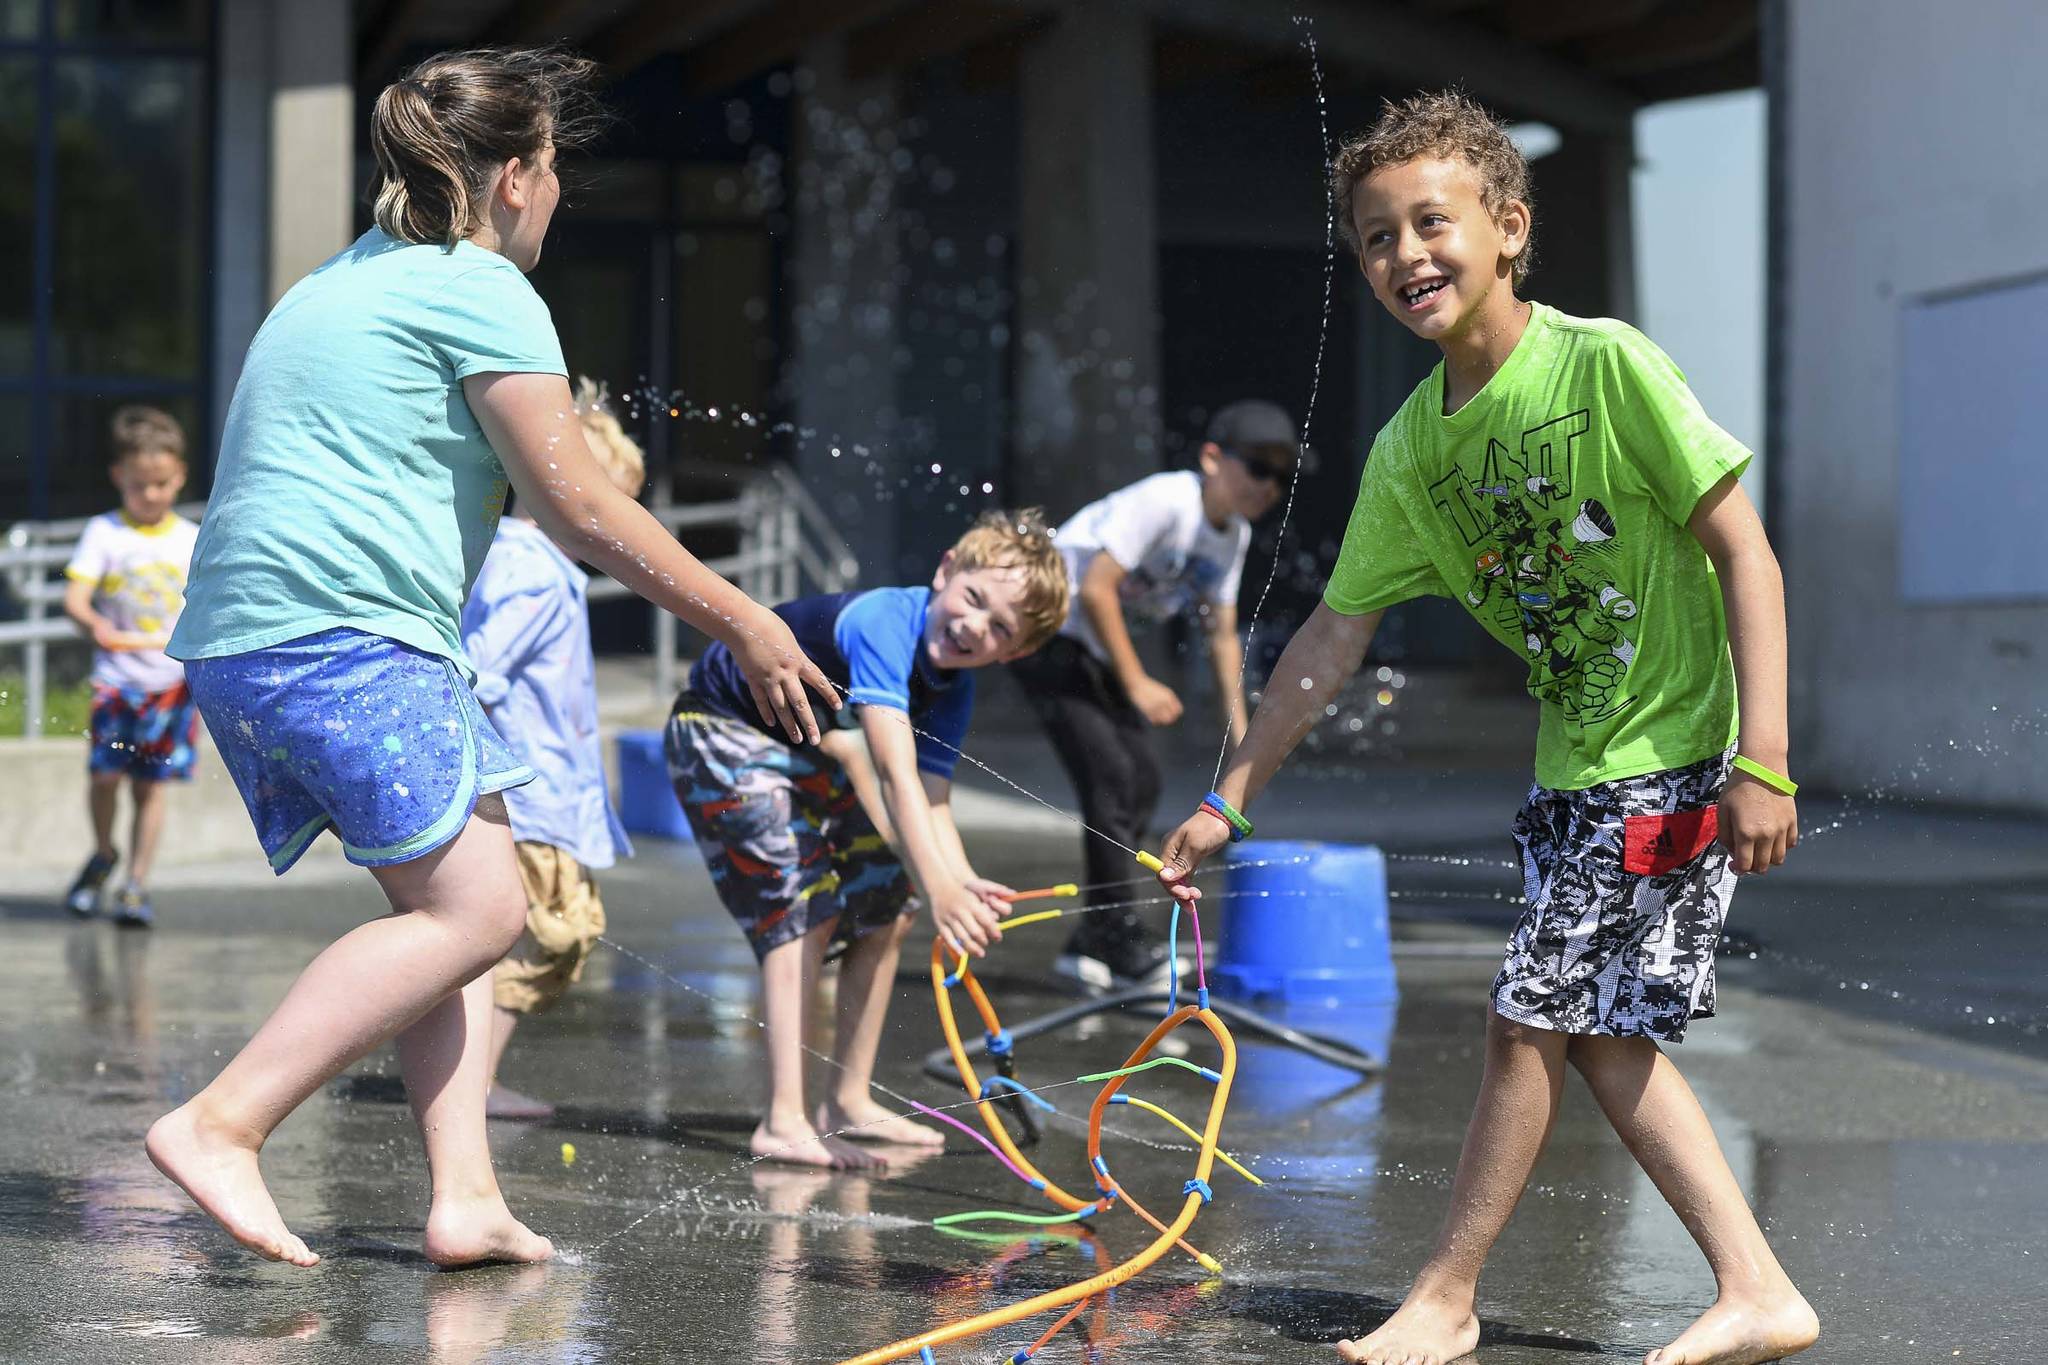 David Kimbrough, 7, right, Clayton Haywood, 6, center, and Kyla Belcourt, 8, play in sprinklers set up during the RALLY program at Harborview Elementary School on Wednesday, June 26, 2019. (Michael Penn | Juneau Empire)